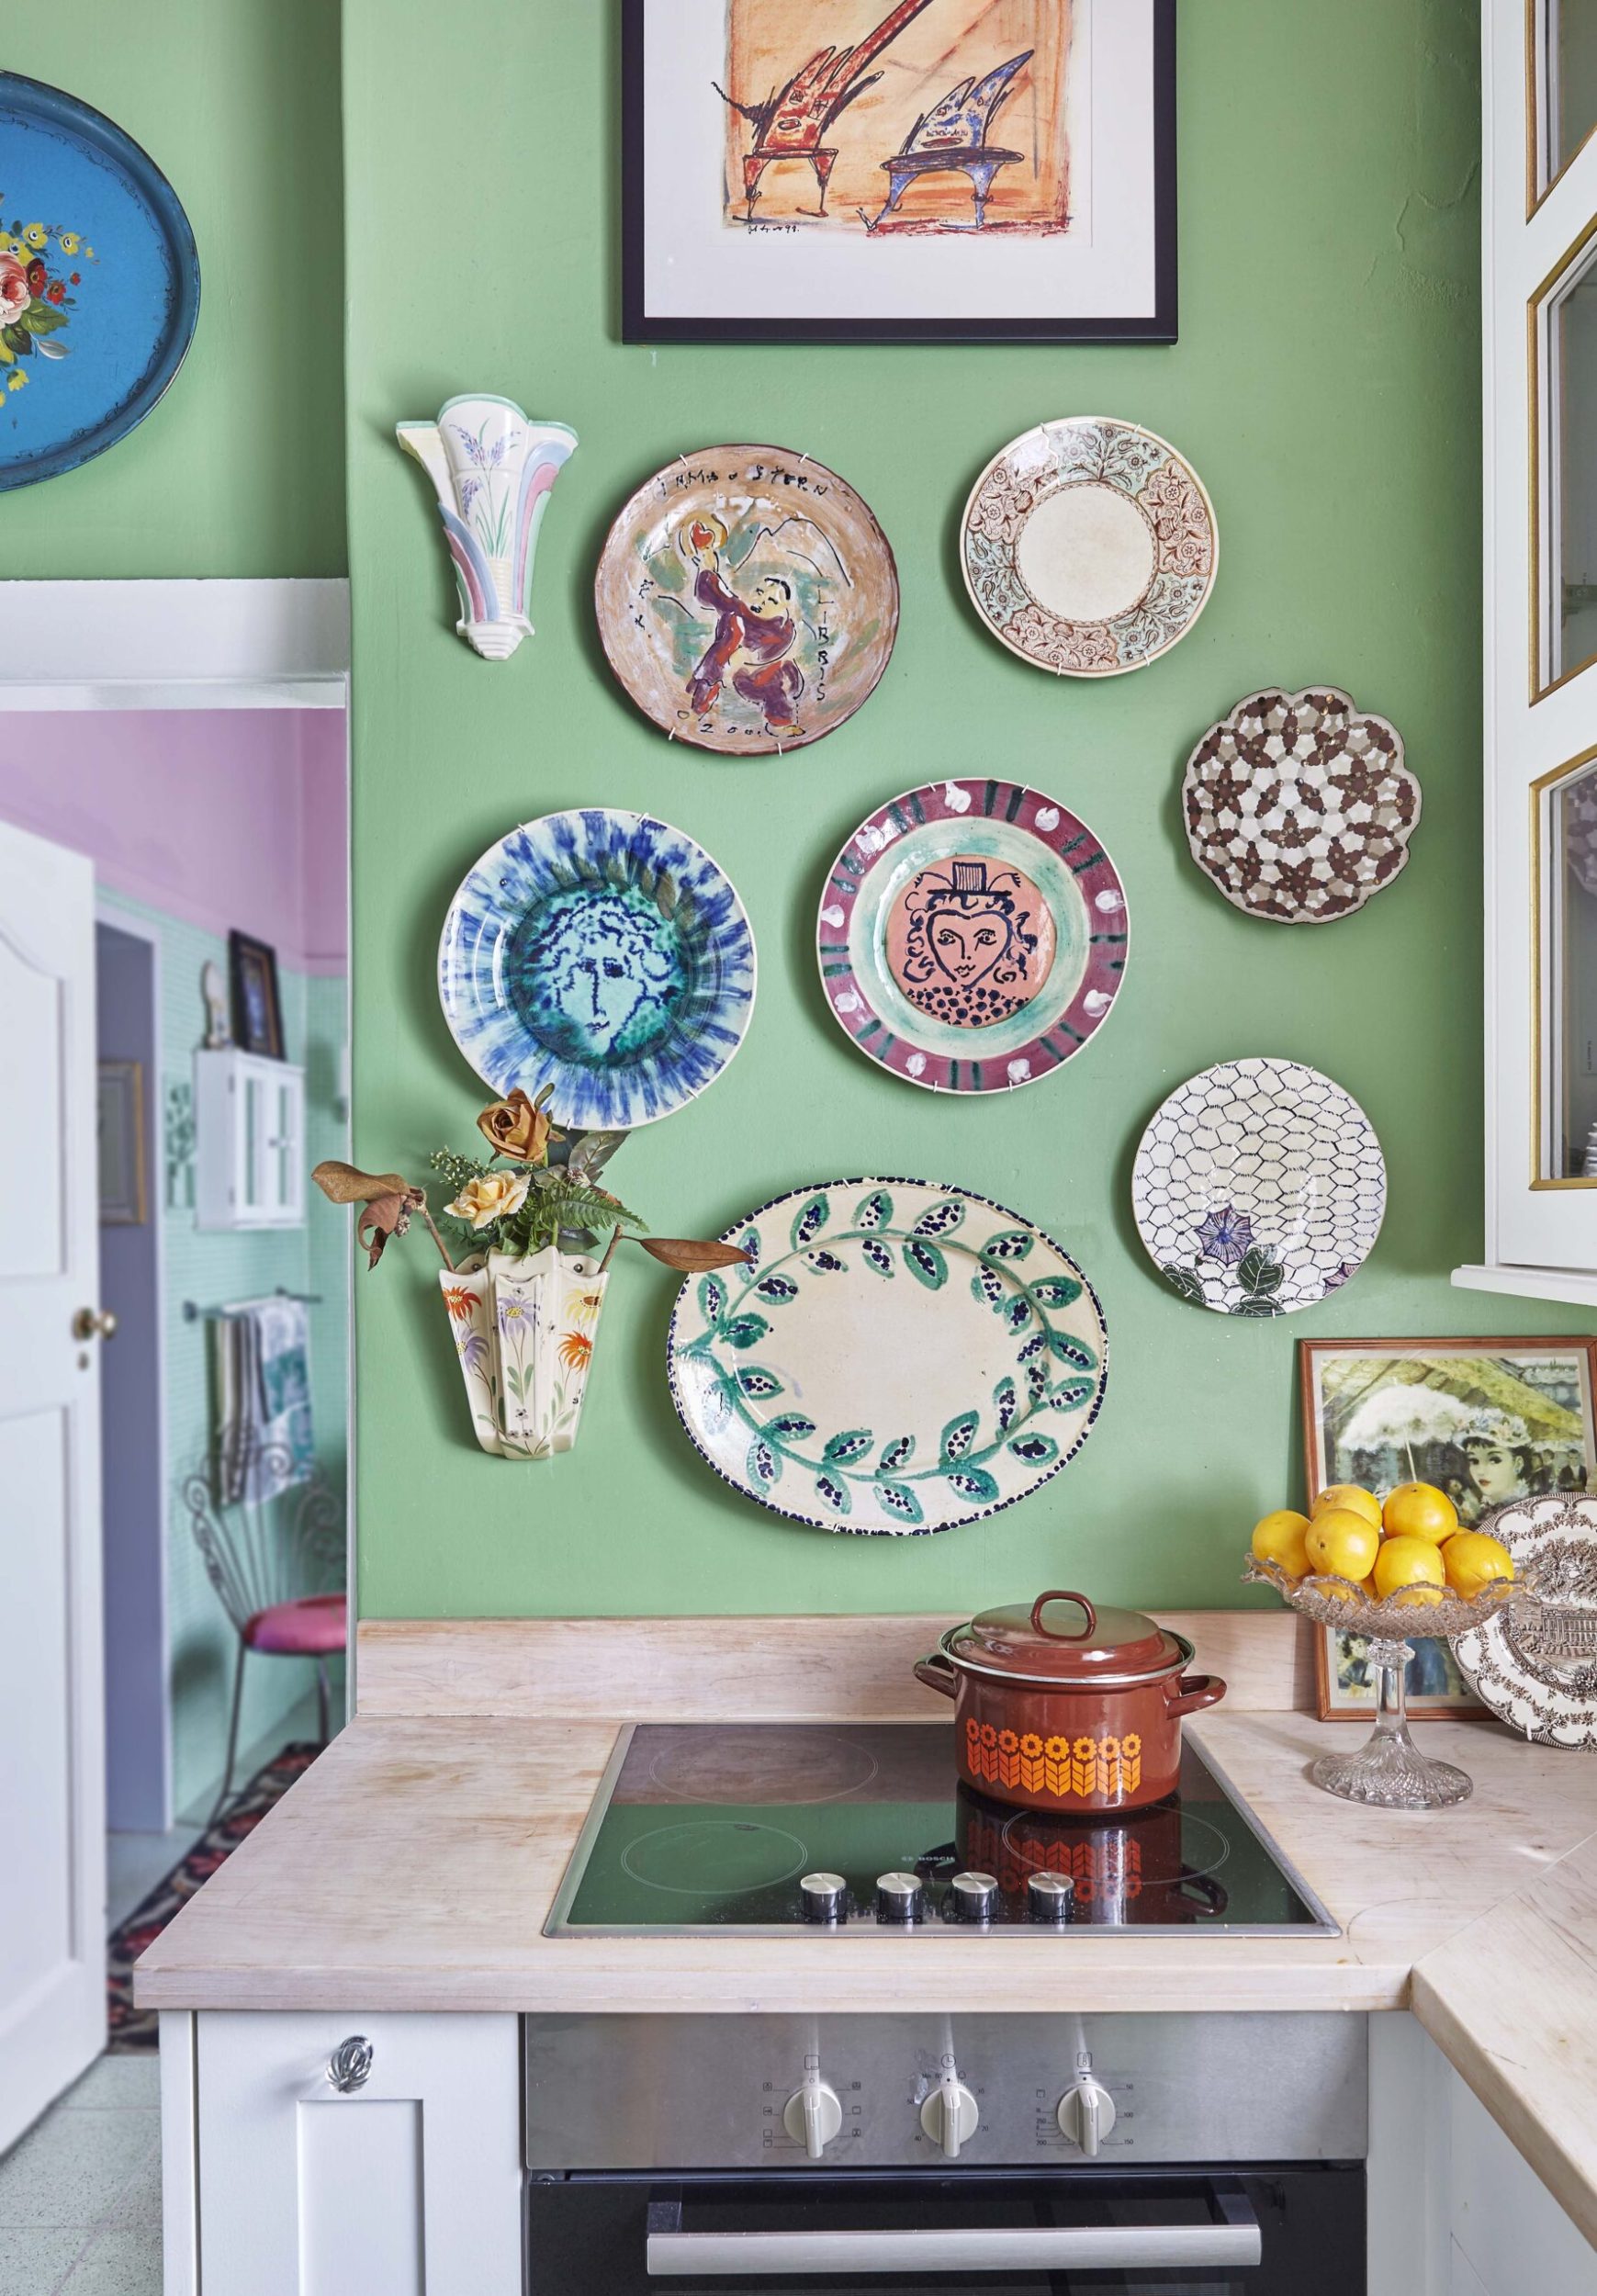 Kitchen stove set in a wood benchtop against a green wall with hanging ceramic plates